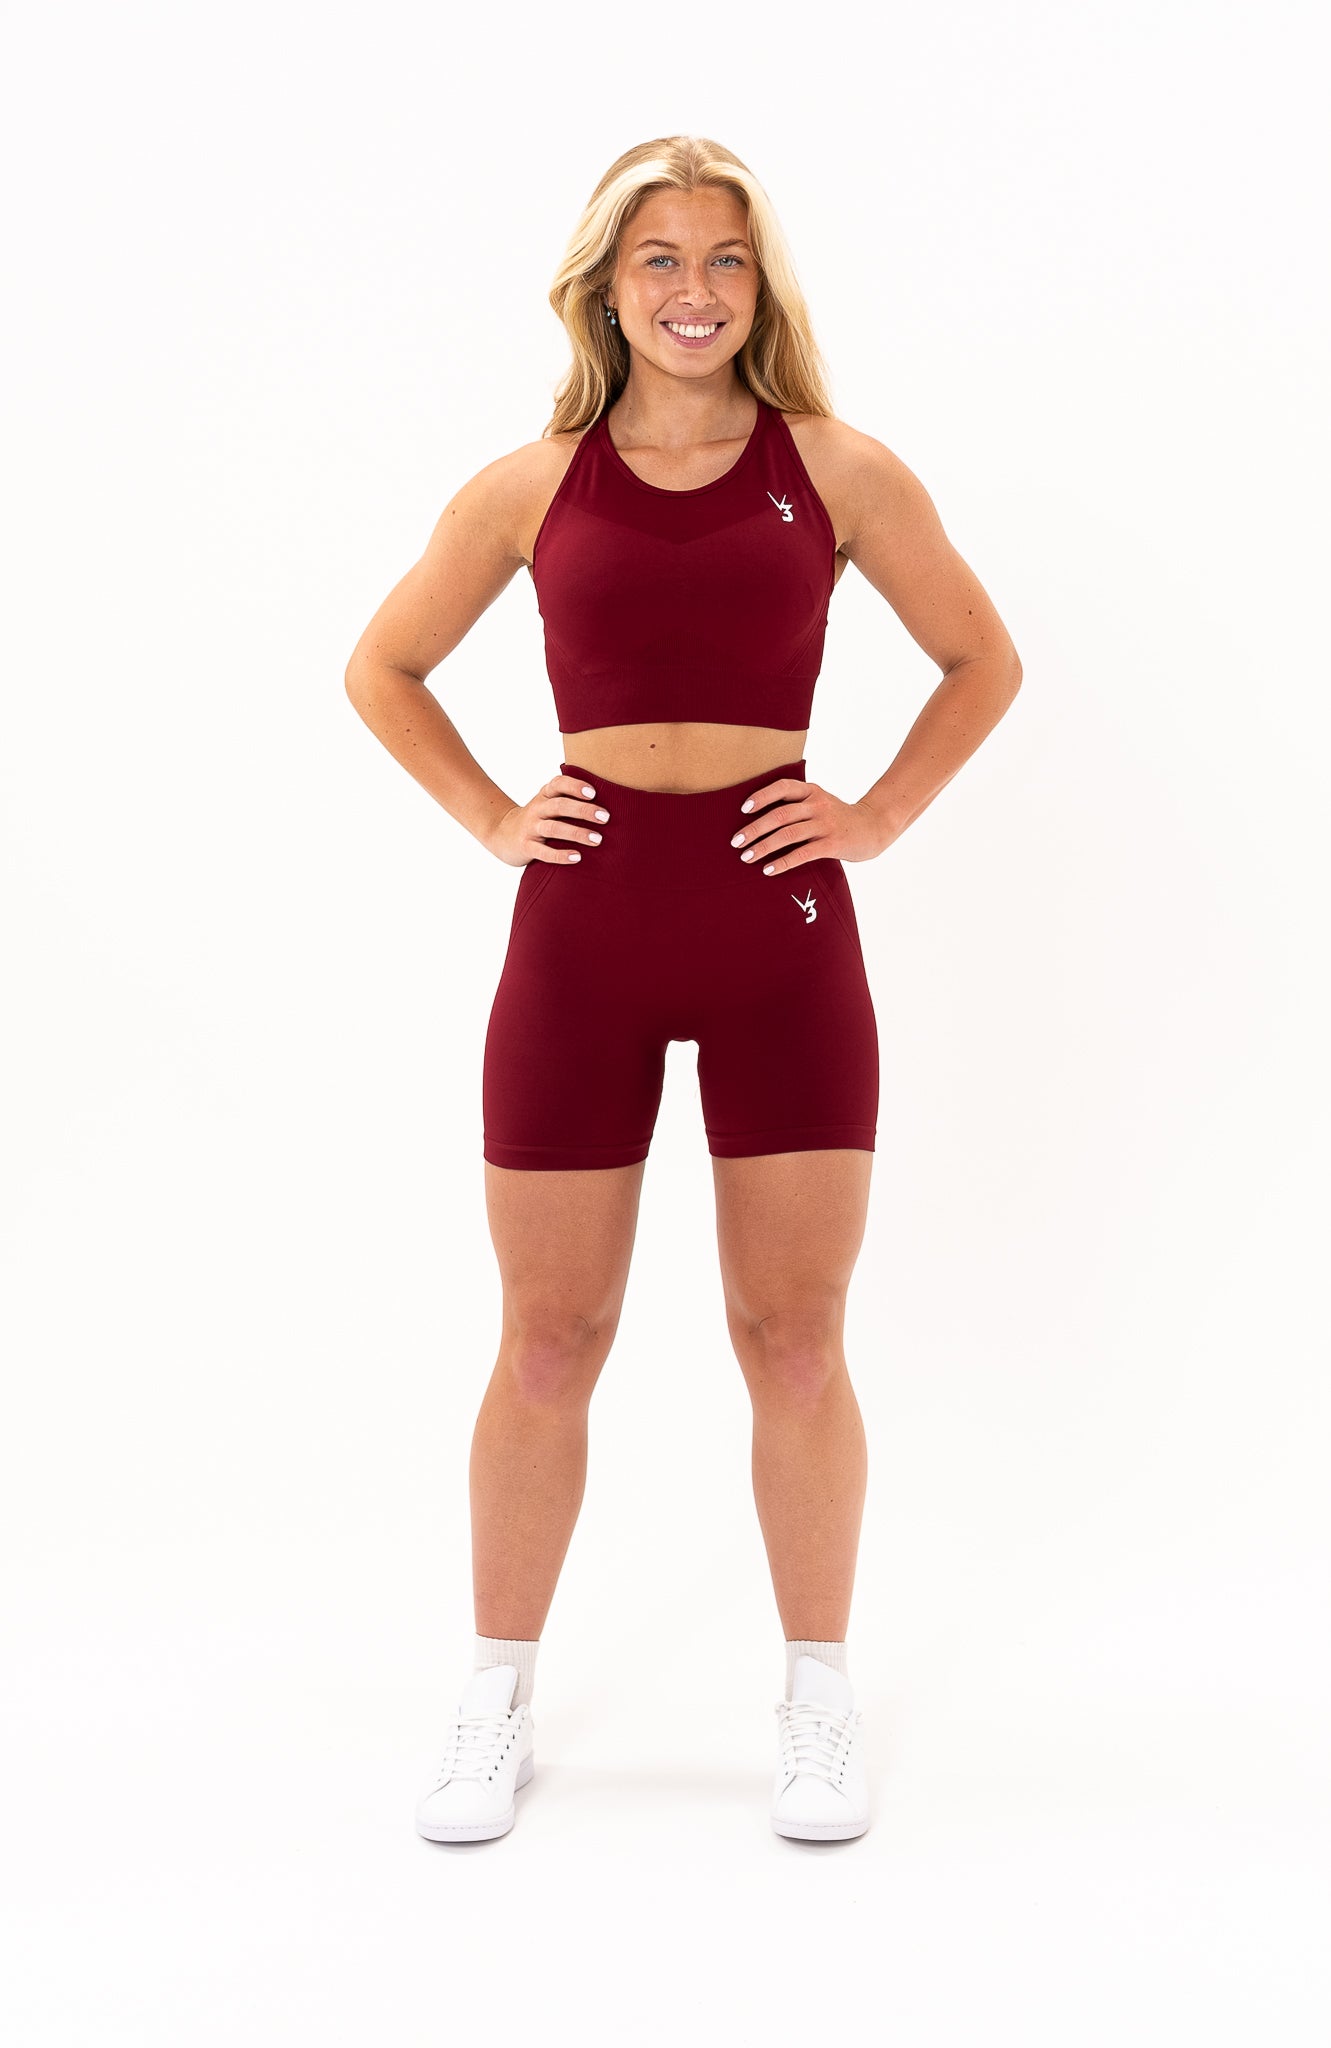 V3 Apparel Women's Tempo seamless scrunch bum shaping high waisted shorts and training sports bra in burgundy red – Squat proof 5 inch leg cycle shorts and training bra for Gym workouts training, Running, yoga, bodybuilding and bikini fitness.